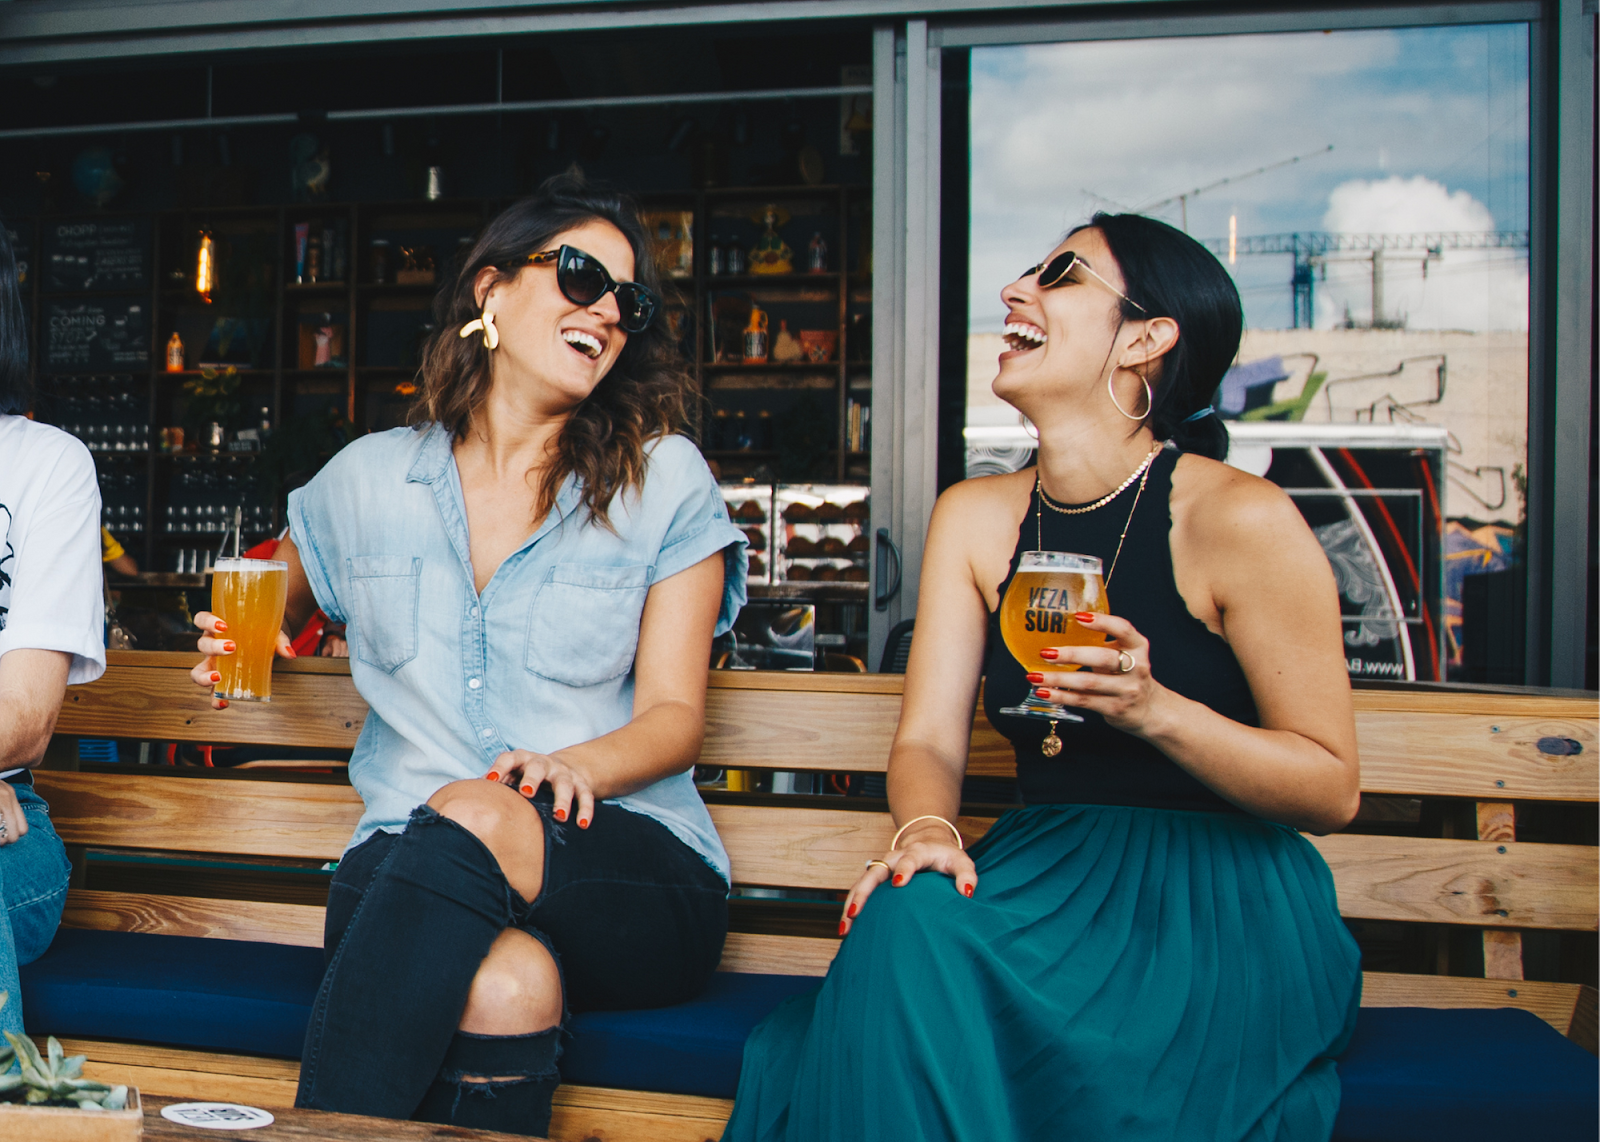 two women sitting on bench holding beer glasses and laughing